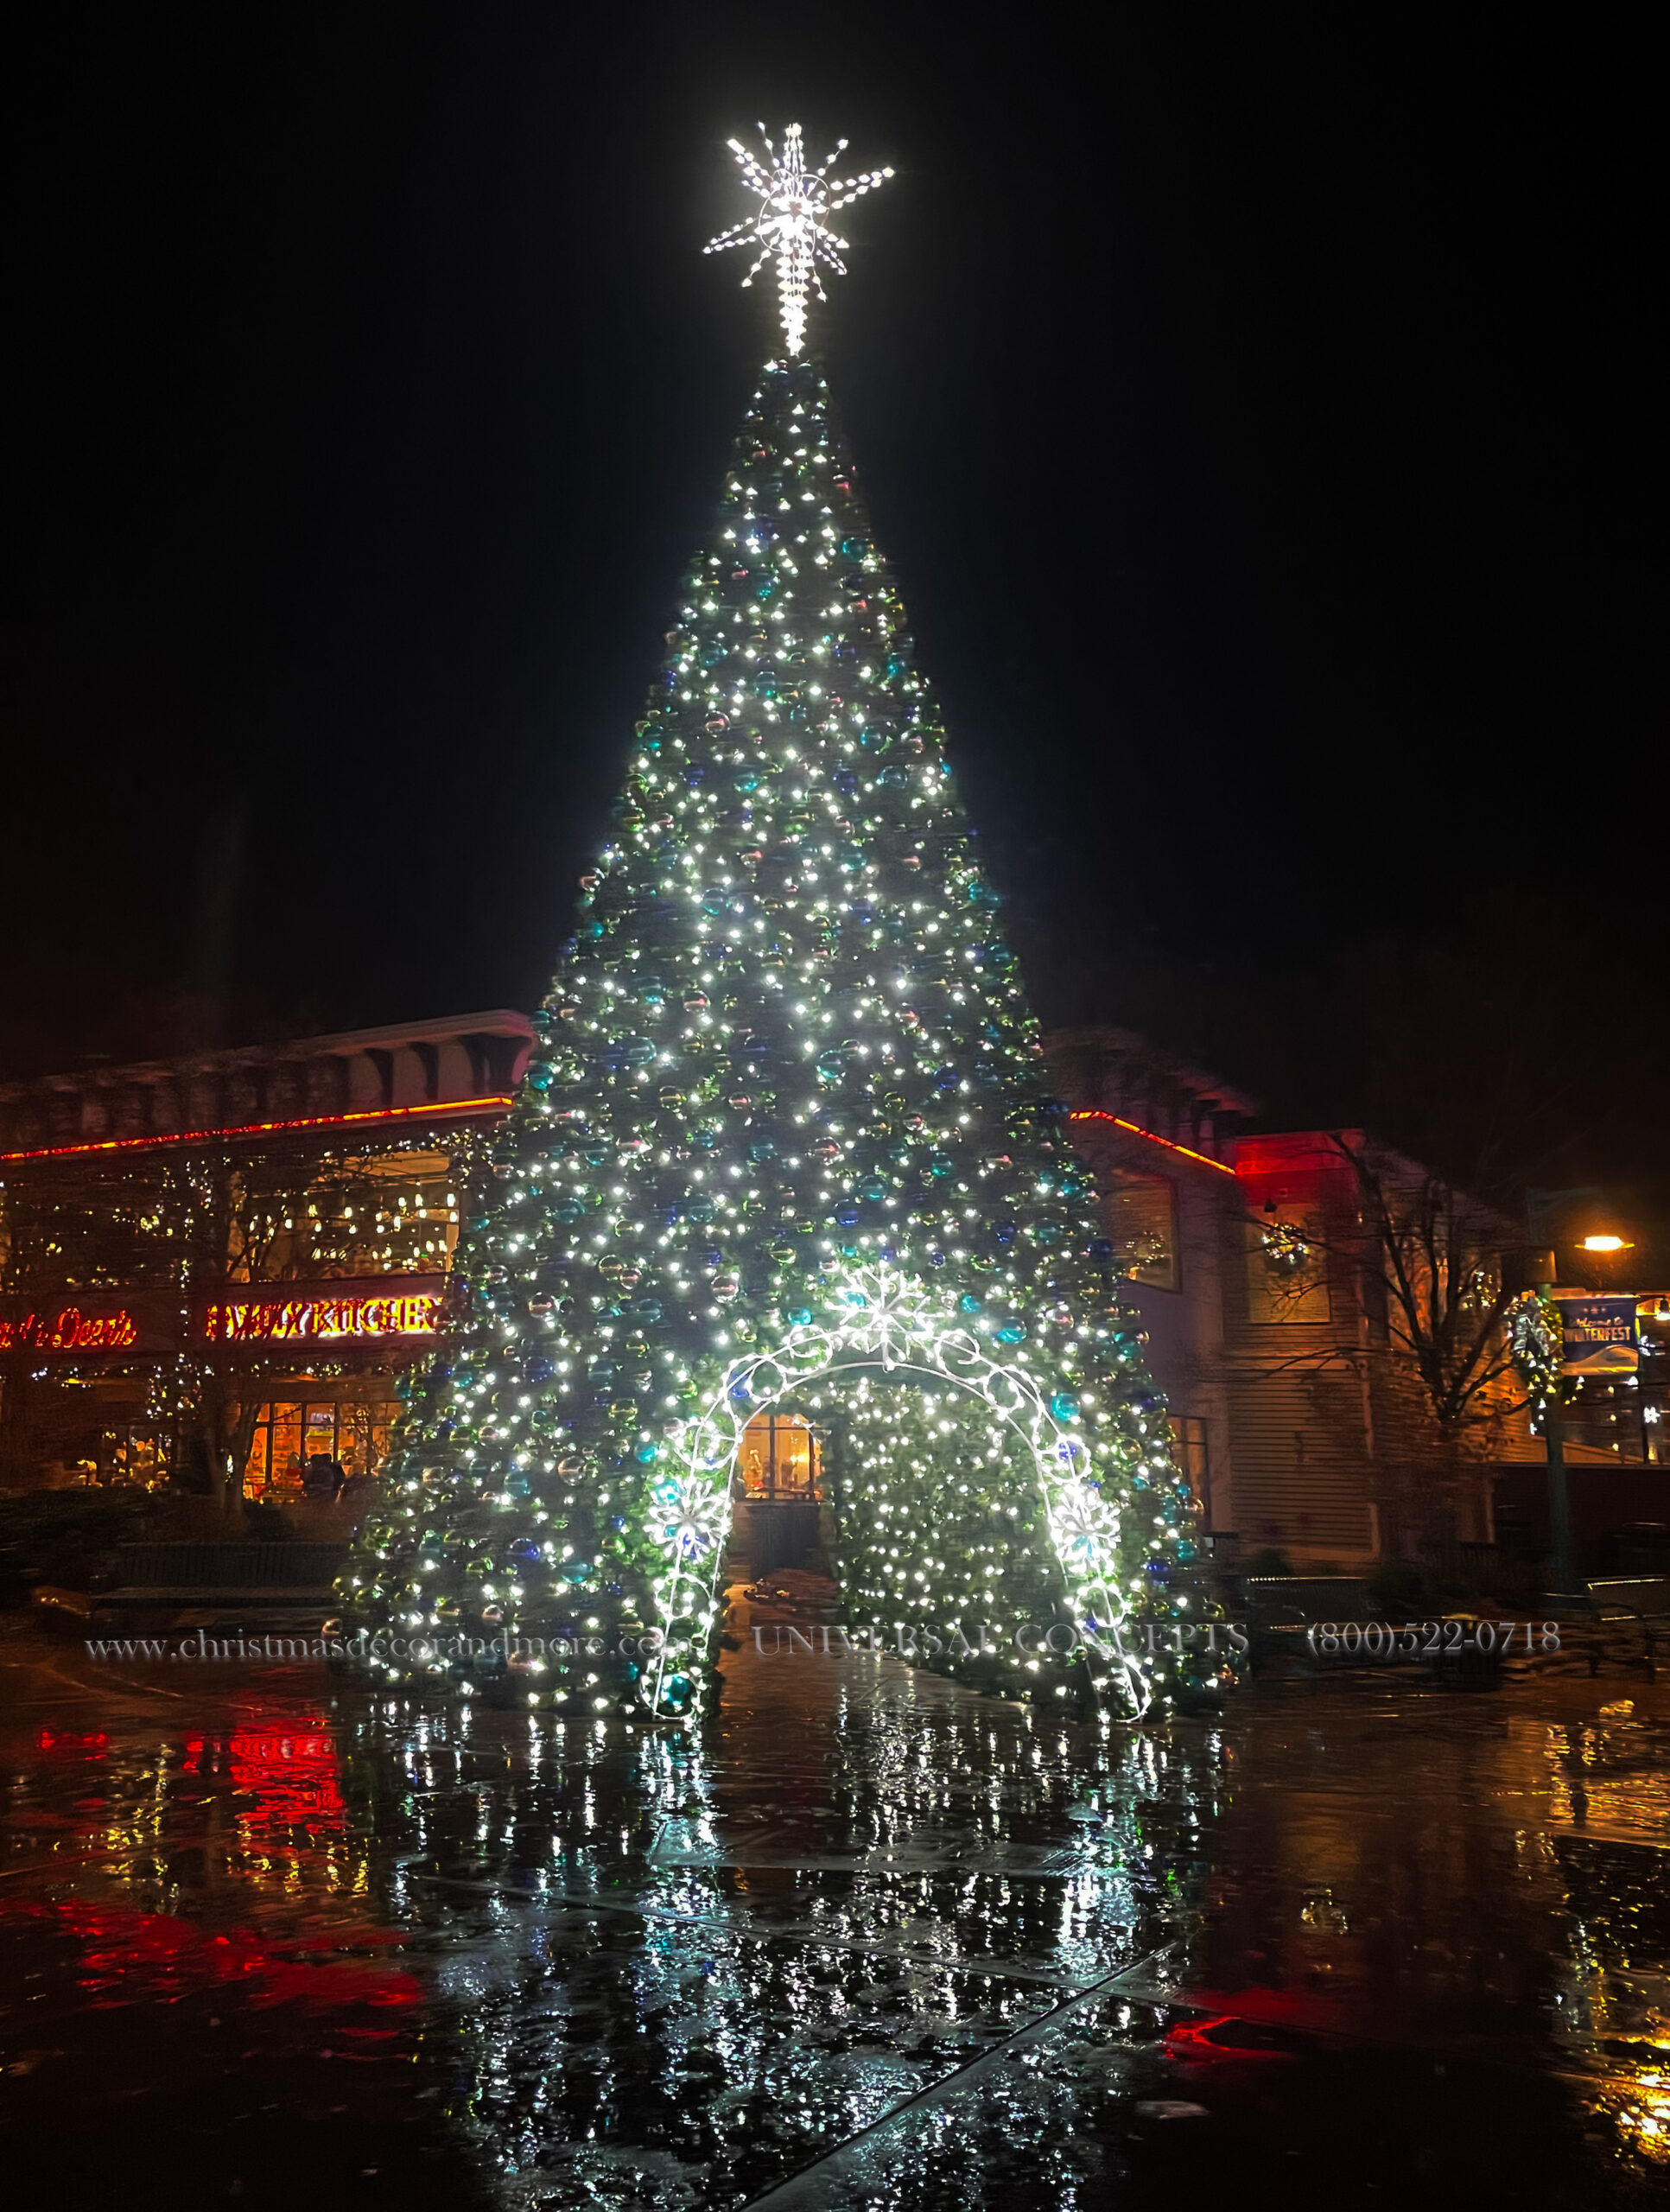 A giant walk-through Christmas tree at Pigeon Forge provided by Universal Concepts